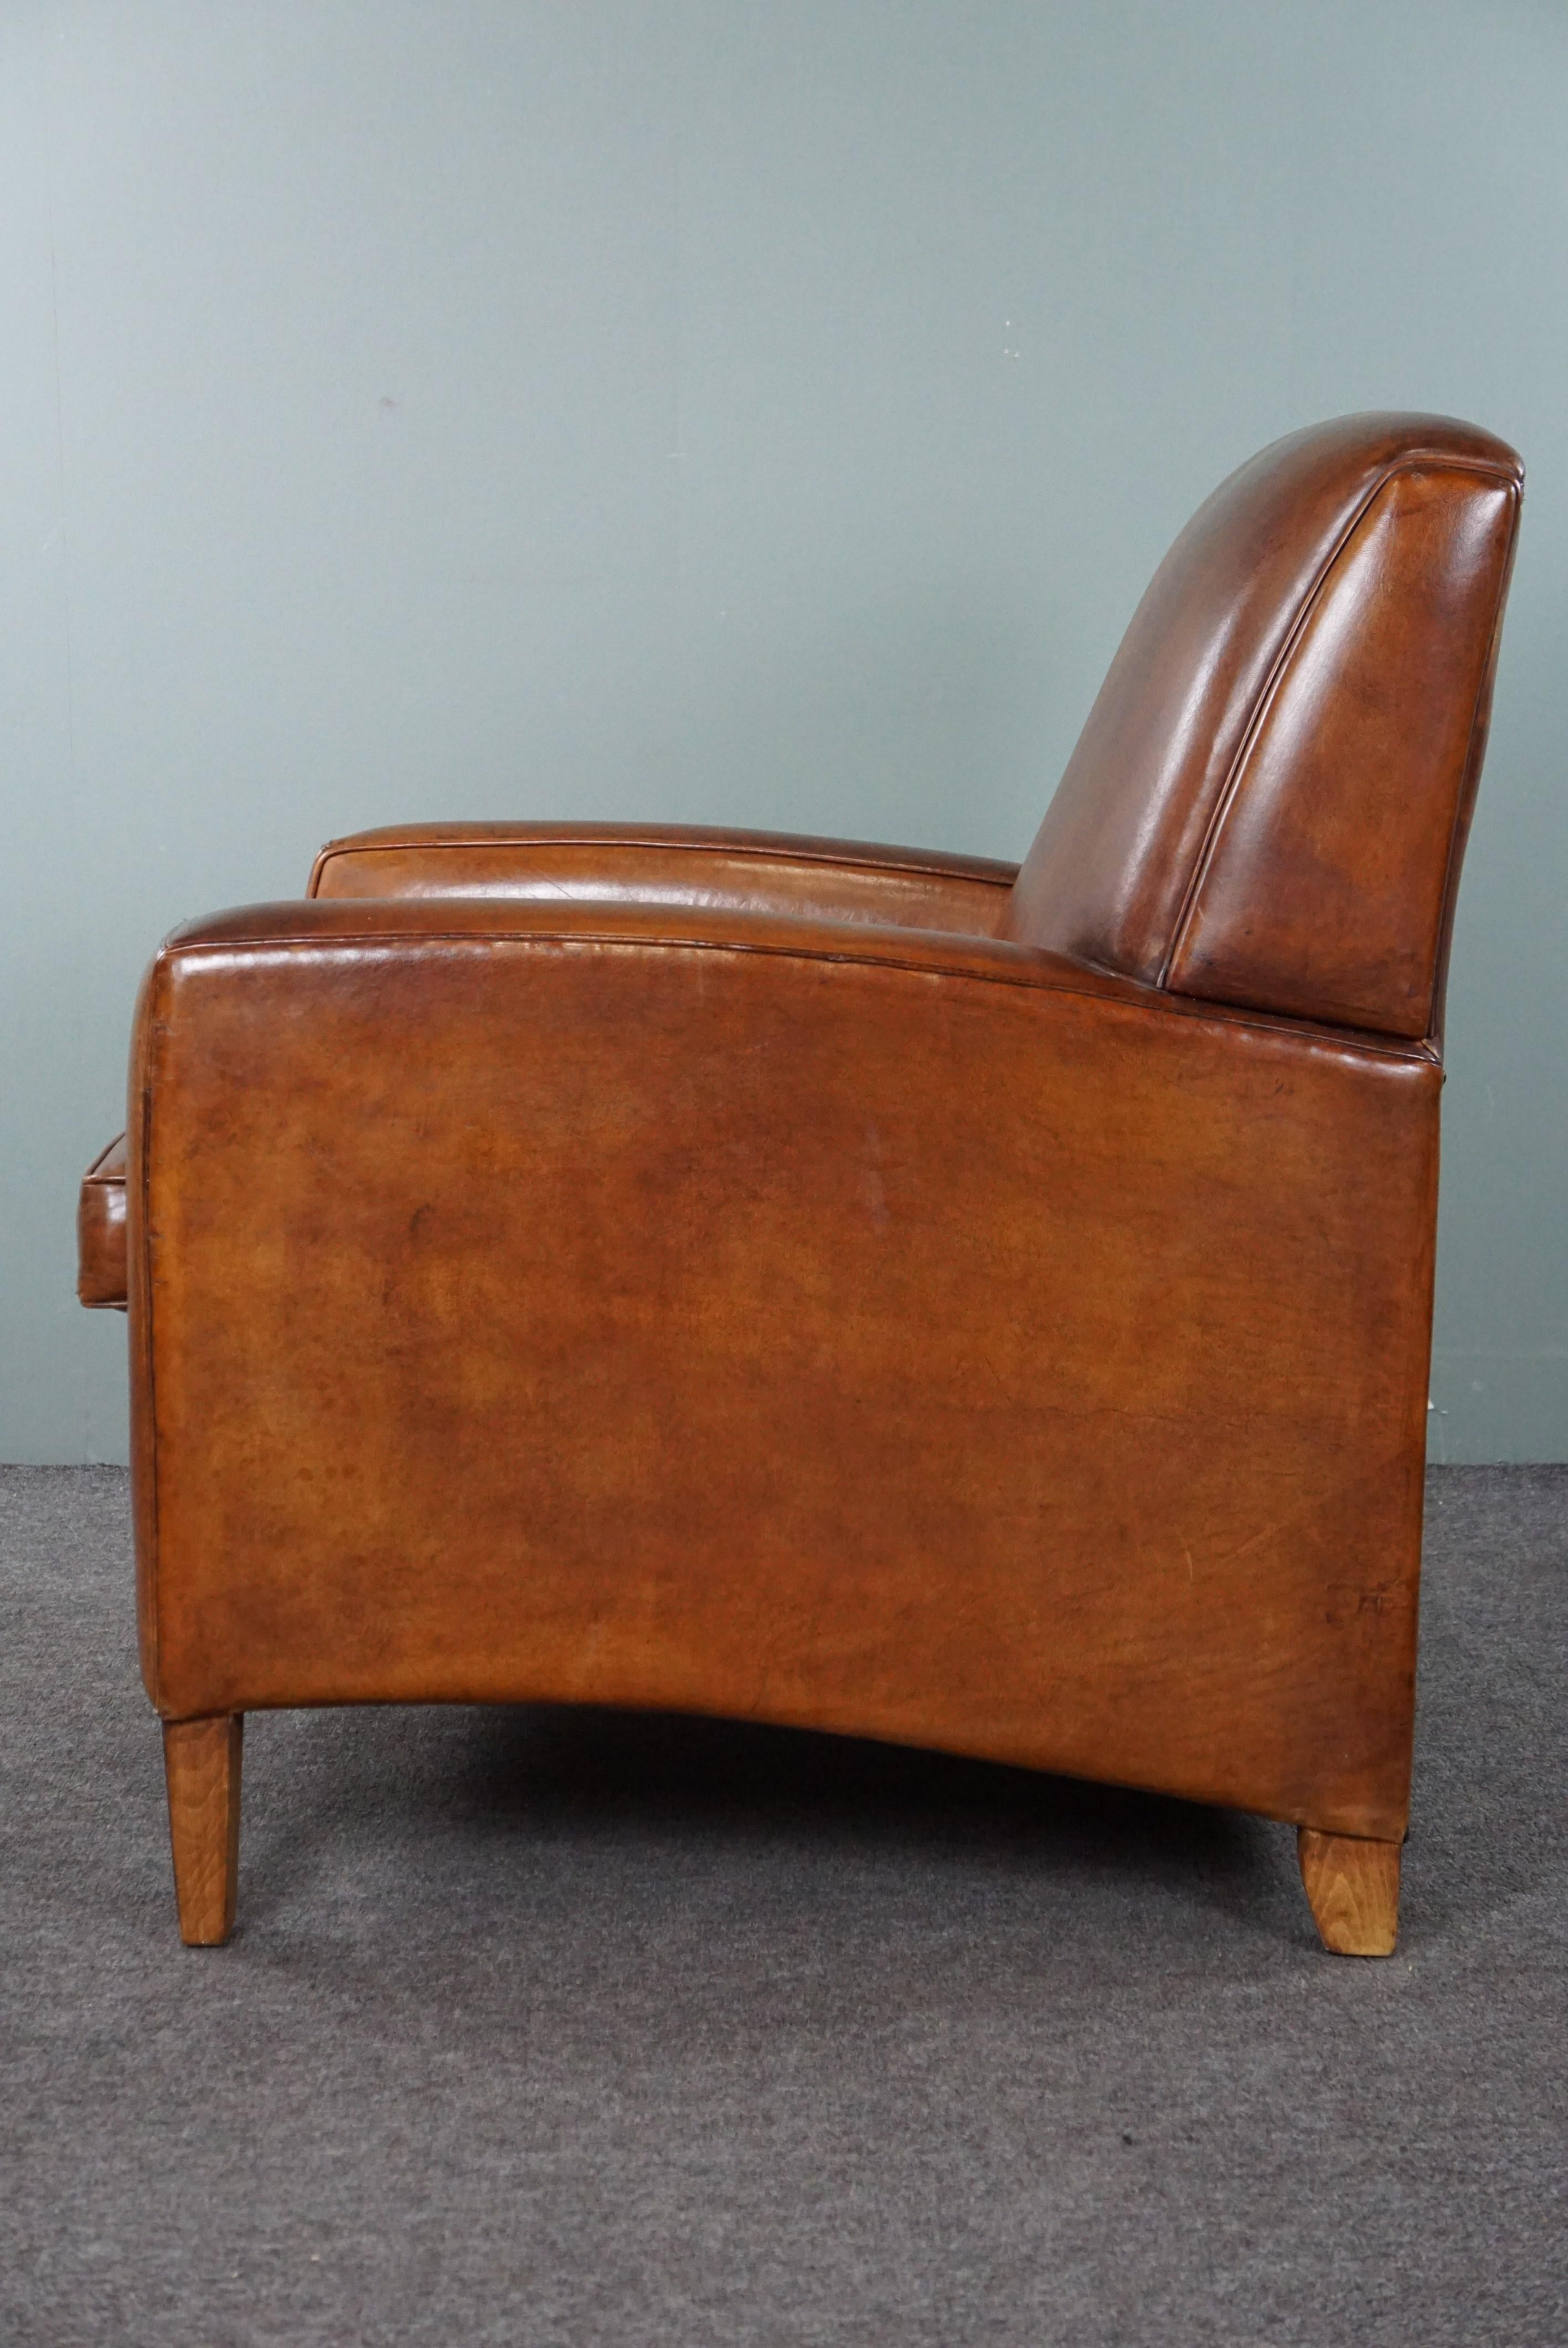 Leather Large cognac-colored sheep leather armchair in good condition with a sleek desig For Sale